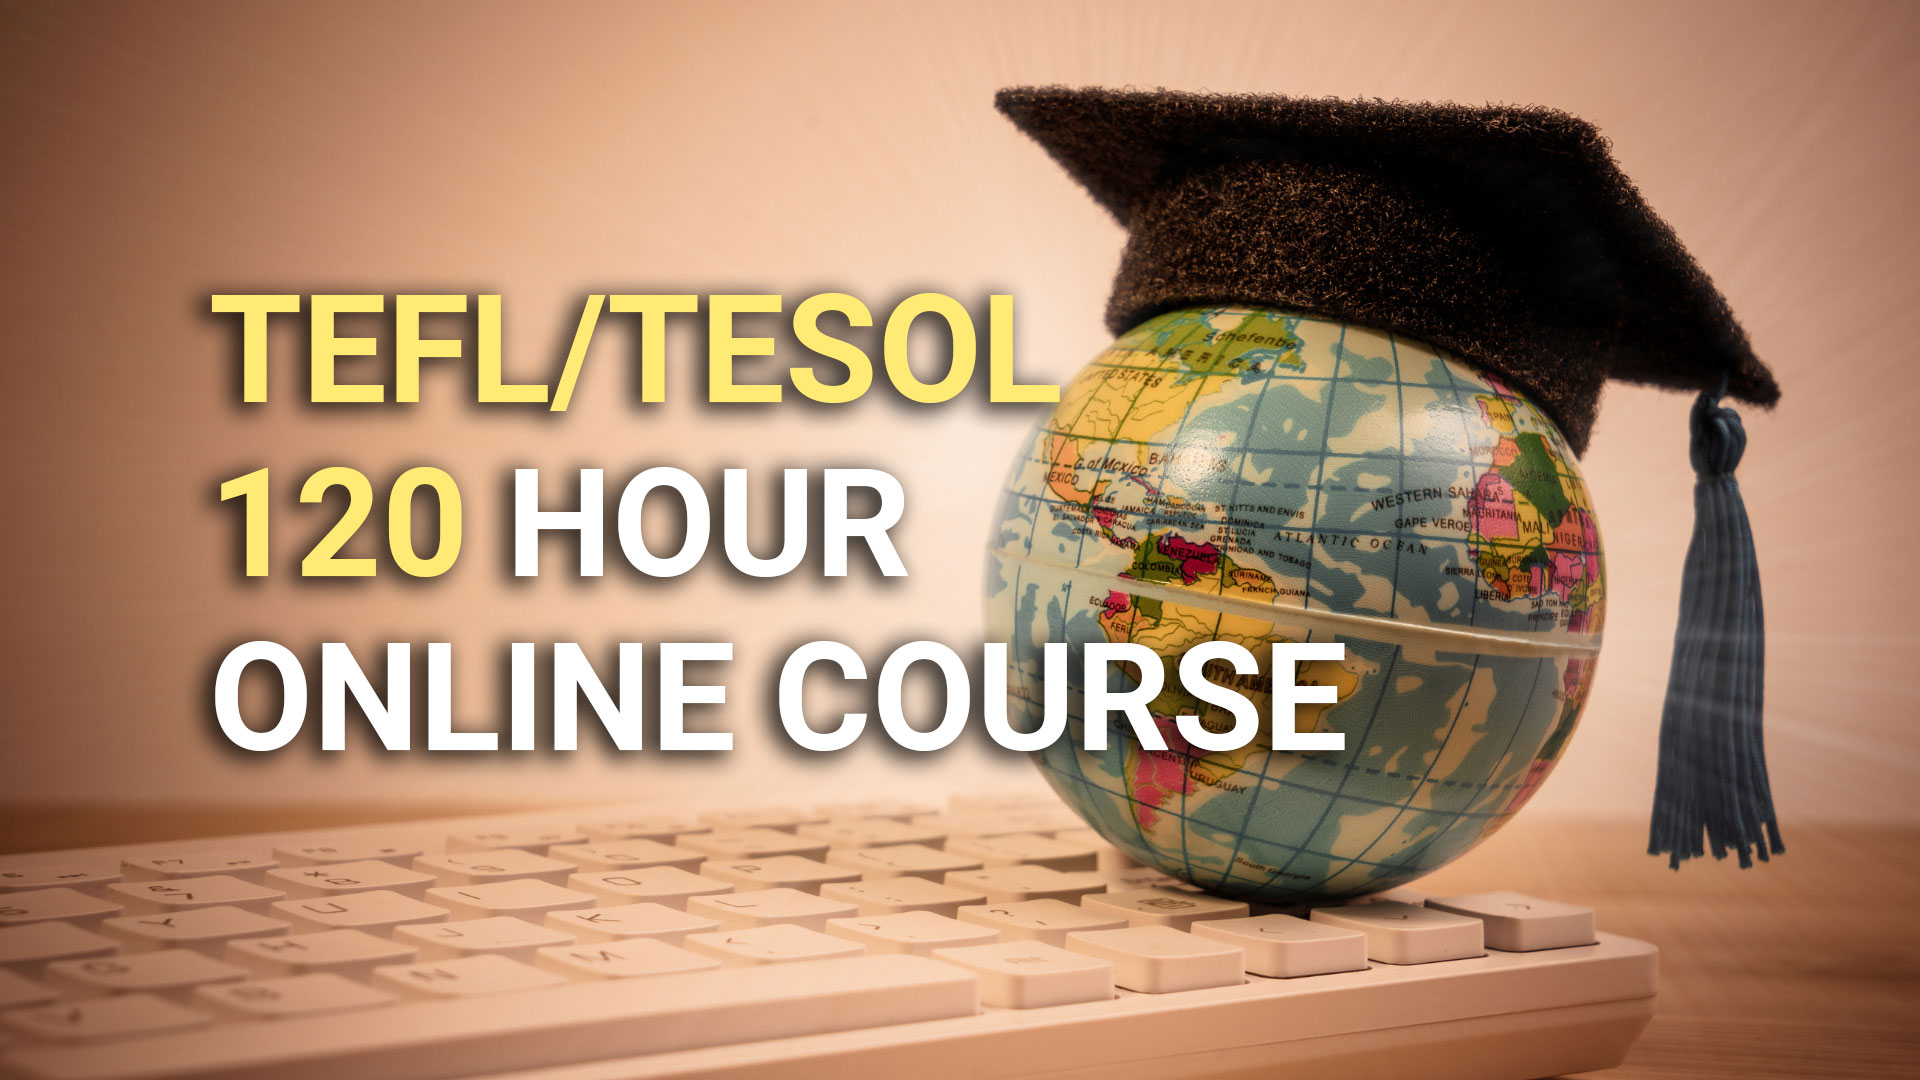 TEFL/TESOL 120 hour online course